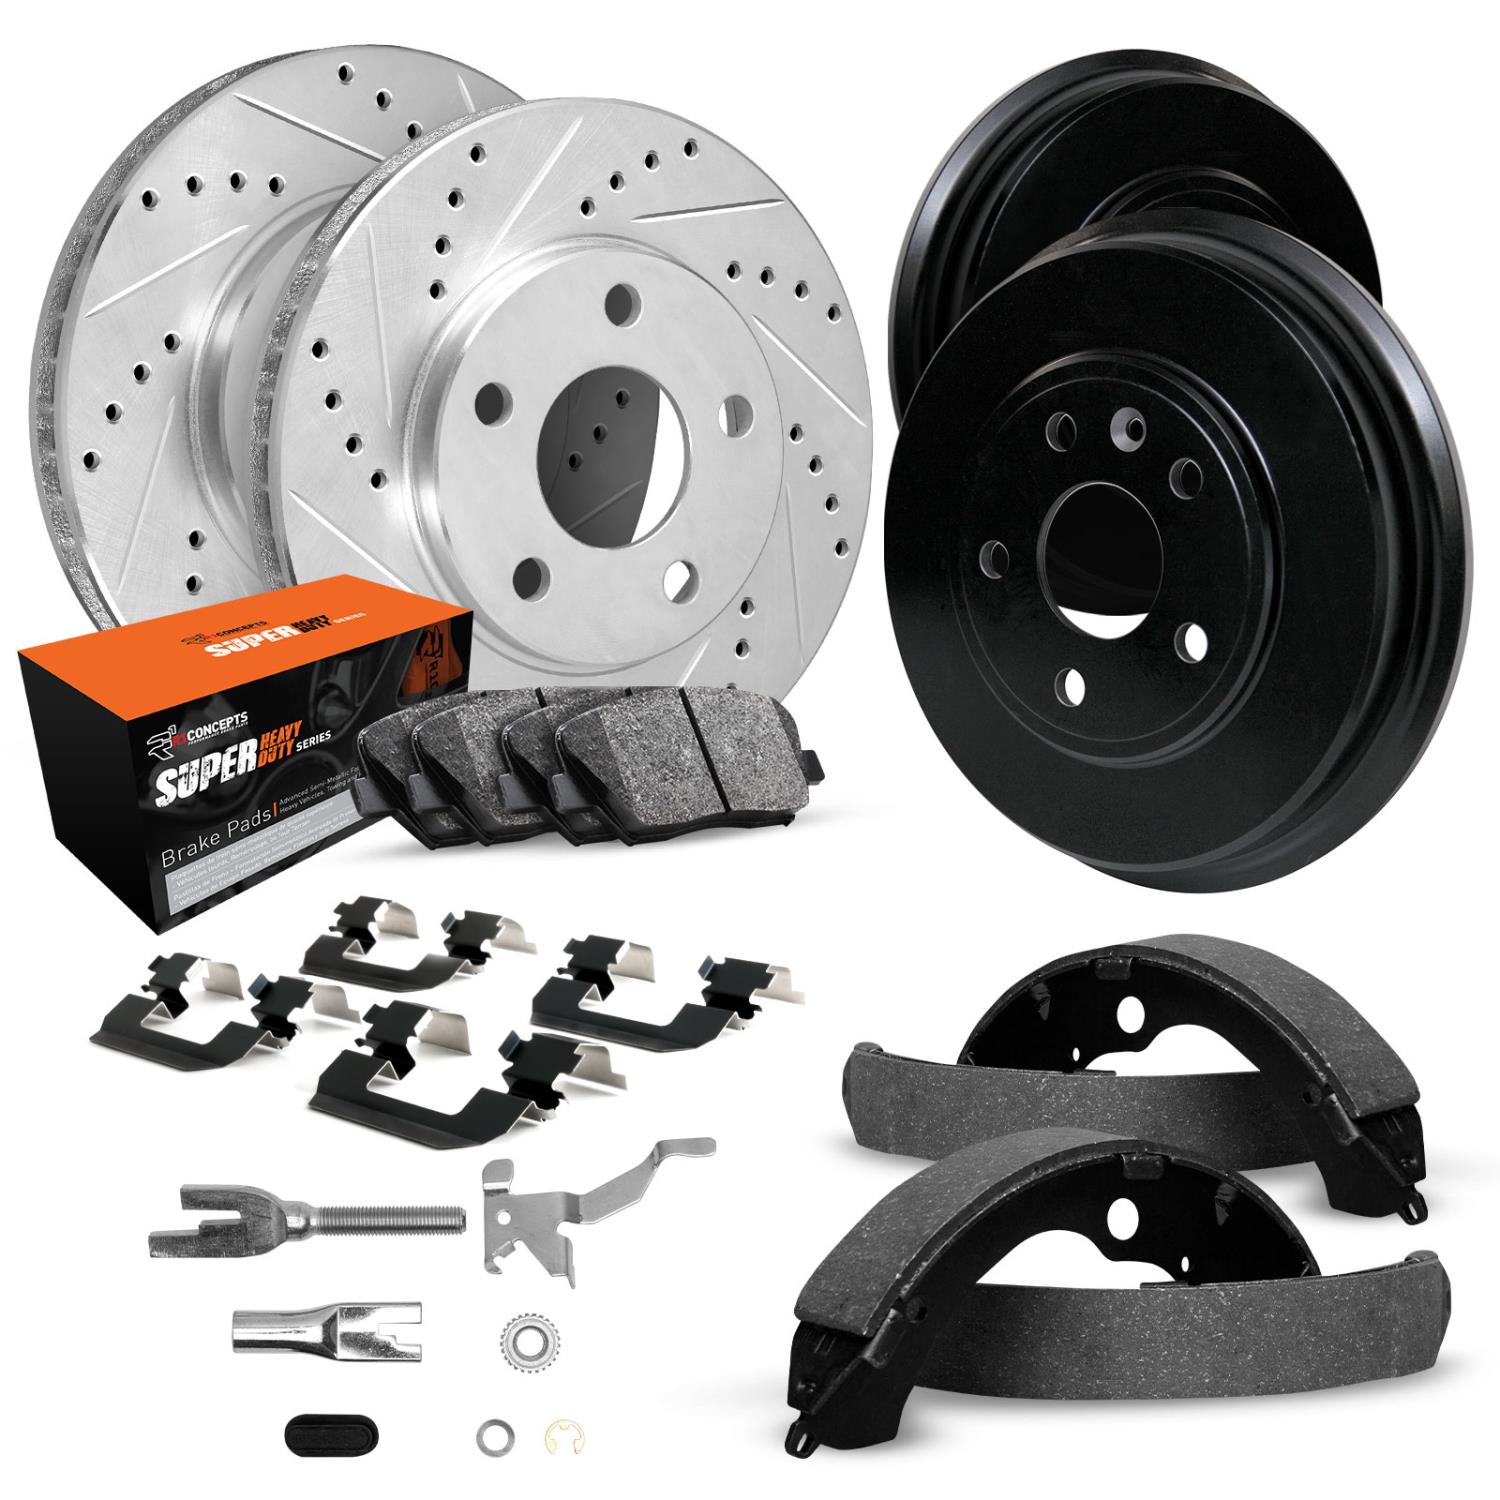 E-Line Drilled/Slotted Silver Rotor & Drum Set w/Super-Duty Pads, Shoes/Hardware/Adjusters, 1974-1976 Ford/Lincoln/Mercury/Mazda